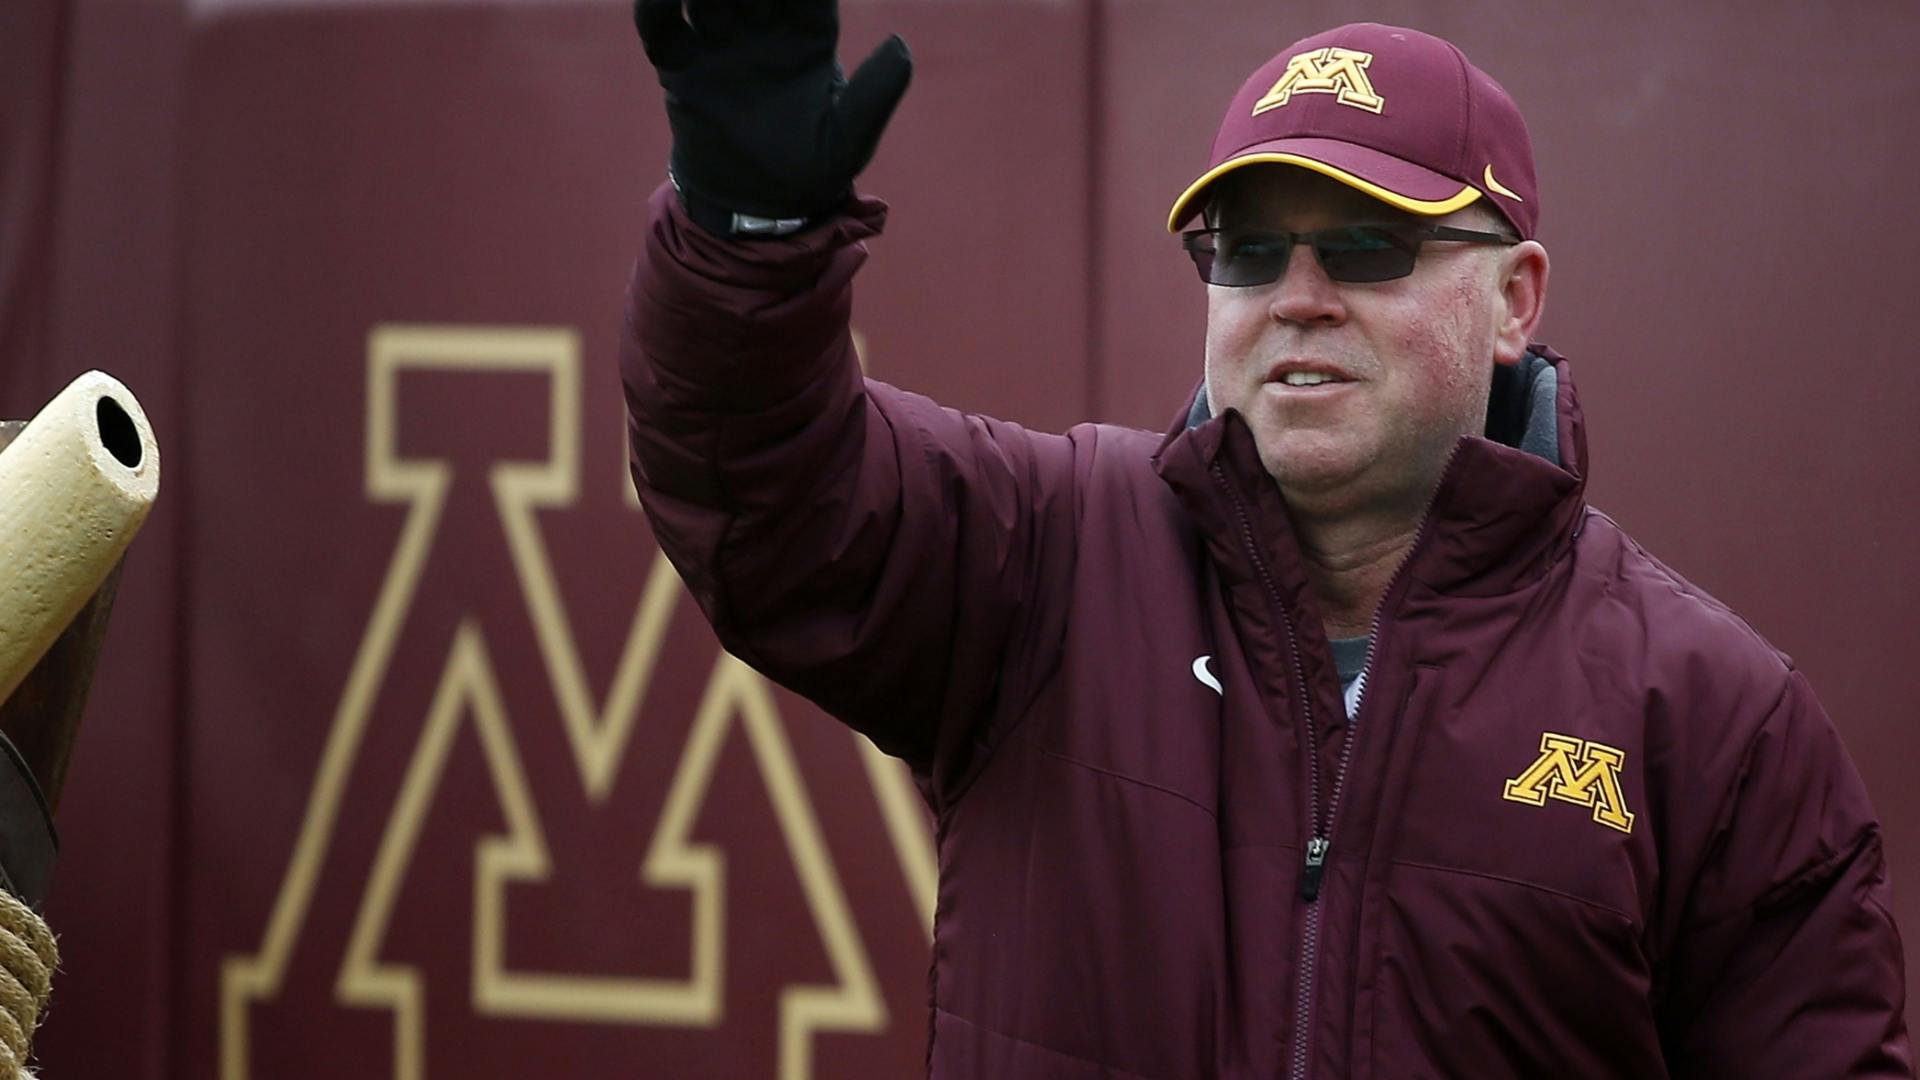 Jerry Kill addresses the media after learning the Gophers were heading to the Citrus Bowl.